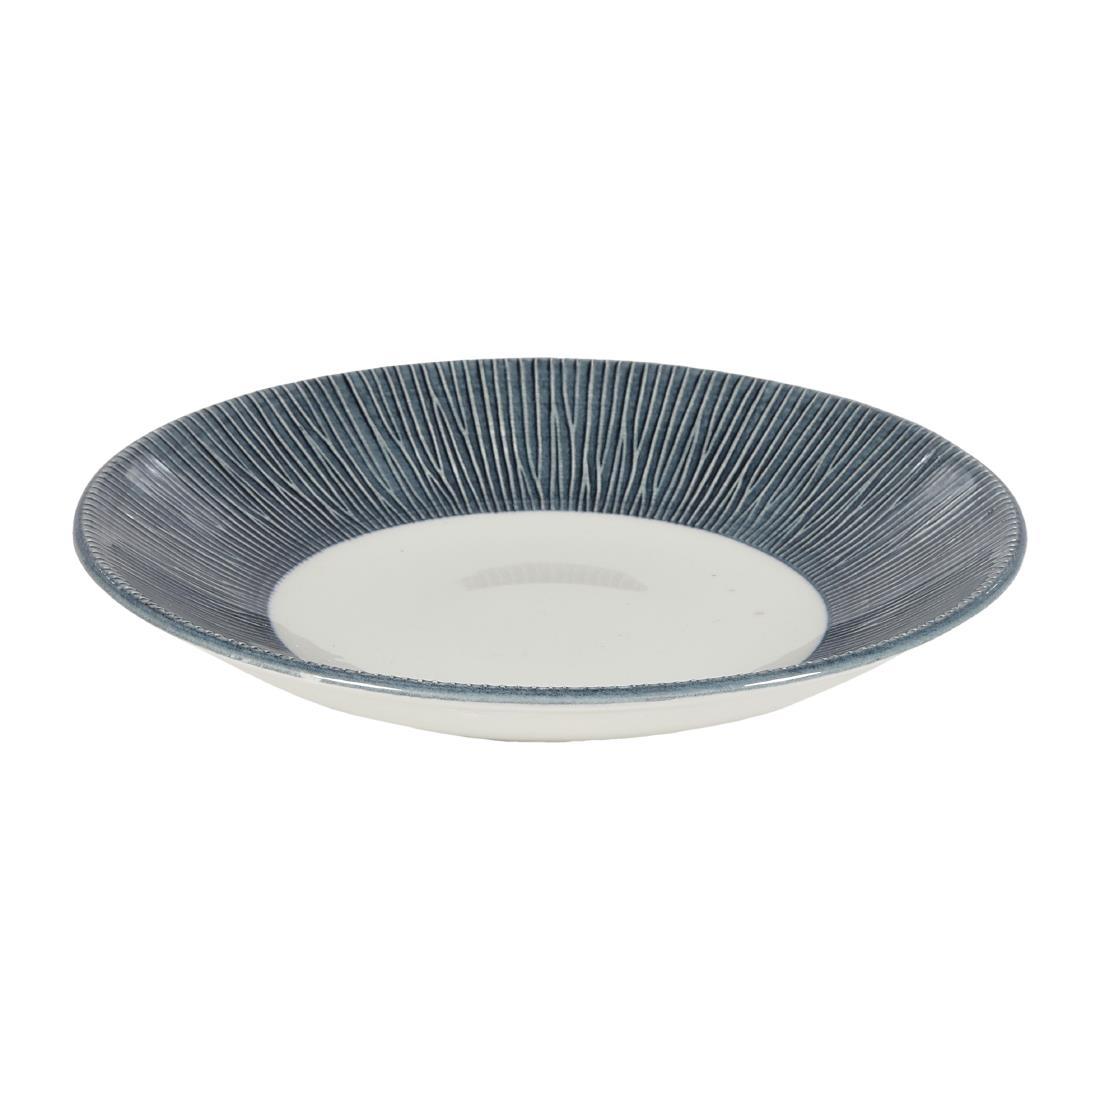 Churchill Bamboo Deep Round Coupe Plates Mist 280mm (Pack of 12) - DY094  - 2